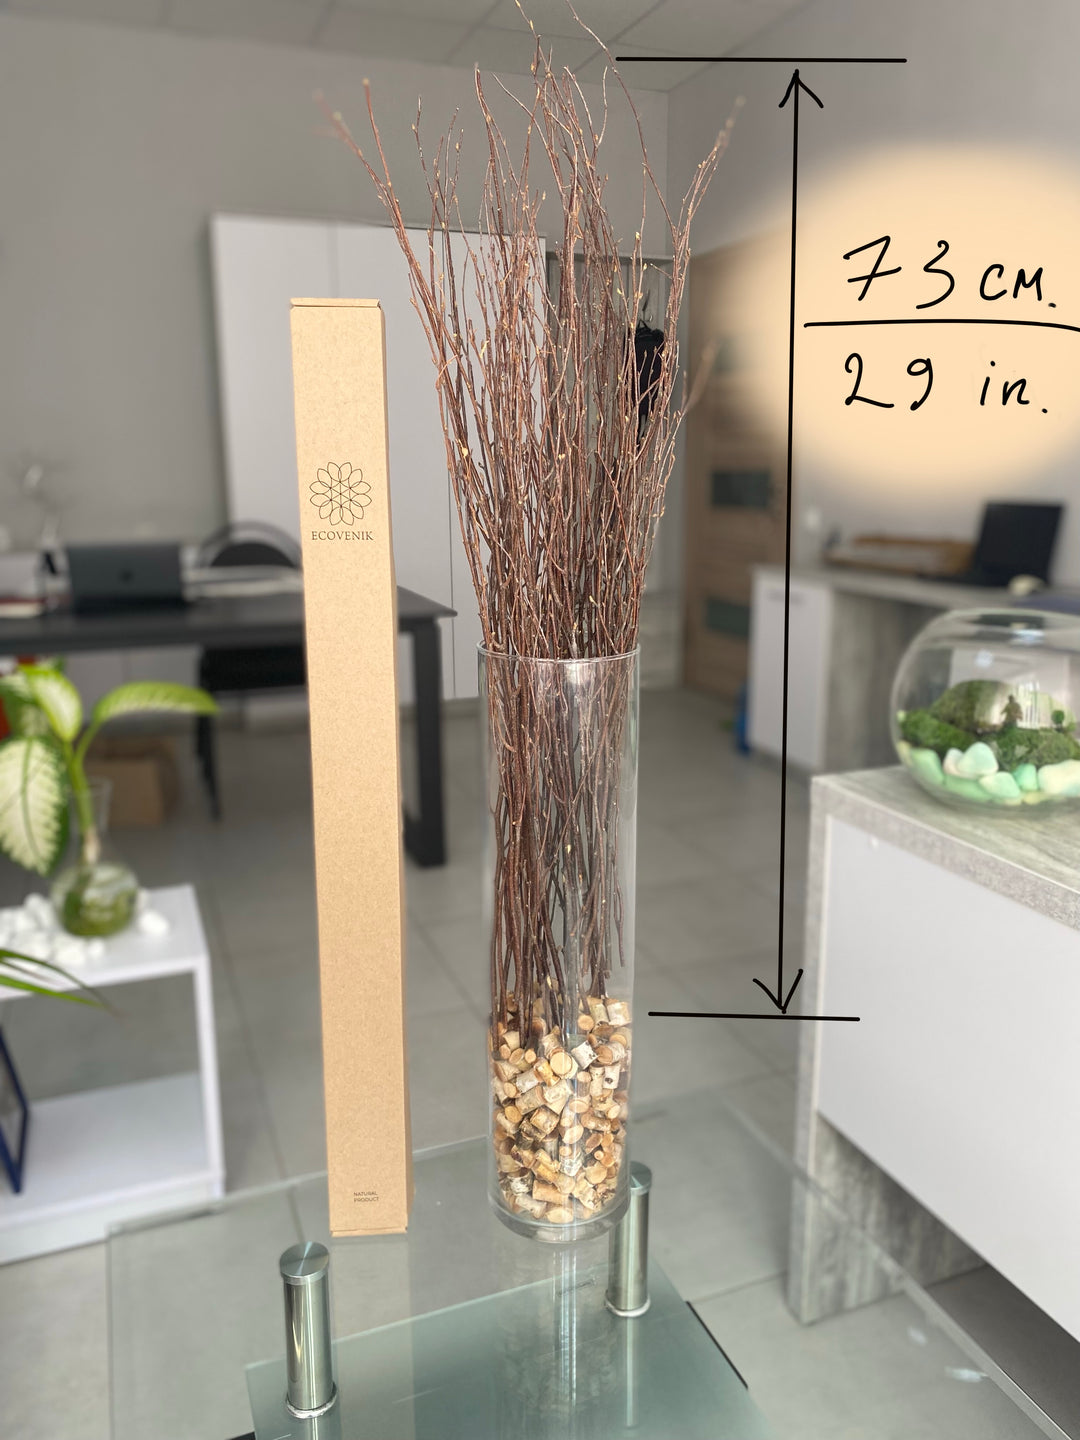 ECOVENIK 25 psc - Branches - 73 cm, Natural Birch Twigs, Pack of 20-25  Stems, Long for Floor vases, (Natural-Brown Color )